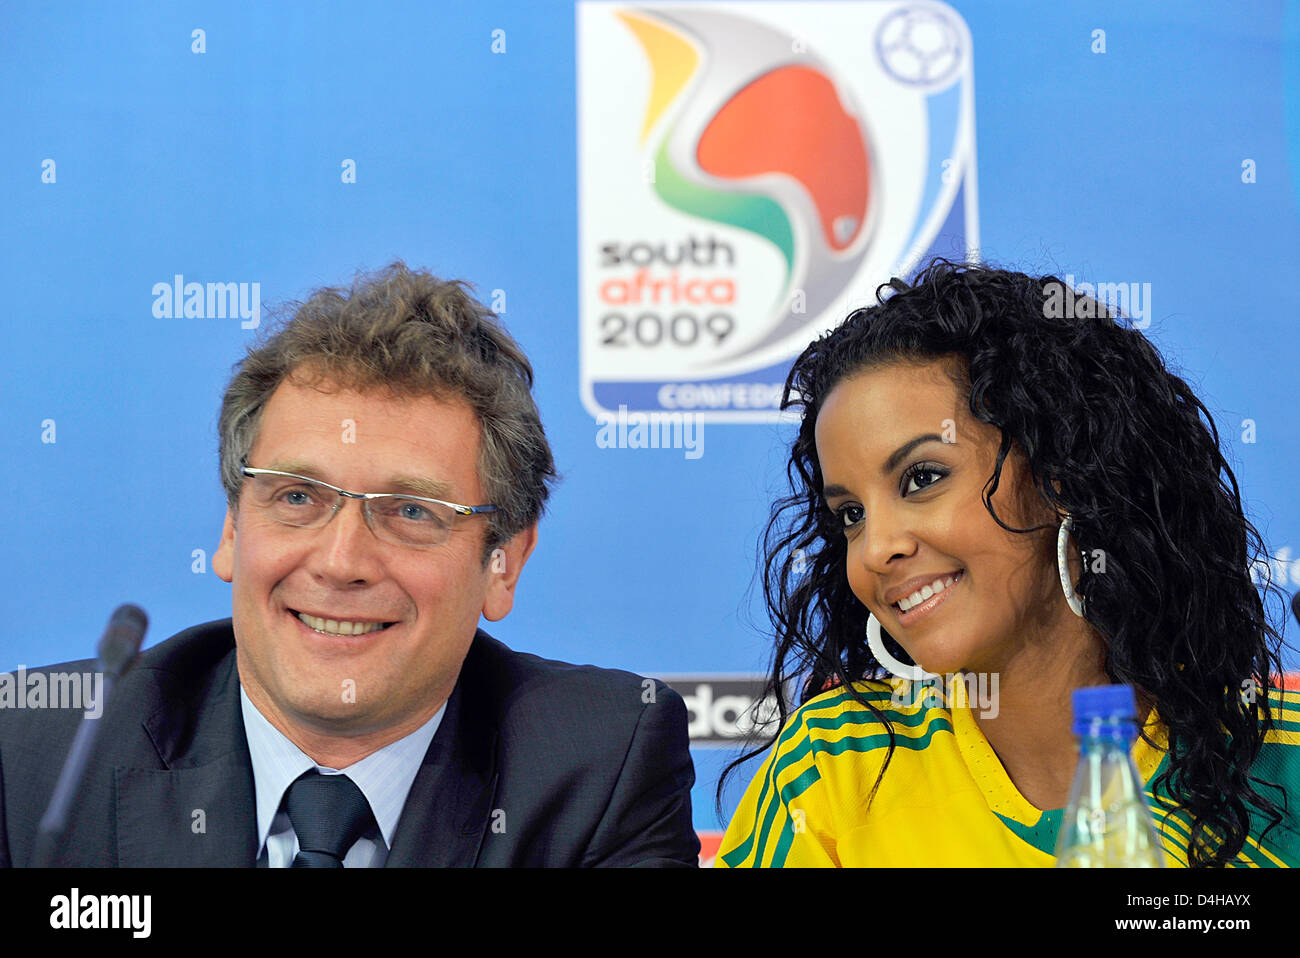 FIFA Secretary General Jerome Valcke (L) and Miss South Africa Tansey Coetzee participate in a press conference in Johannesburg, South Africa, 21 November 2008. One day prior to the drawing of groups for the Confed Cup, Valcke praised World Cup host country South Africa. Photo: Gero Breloer Stock Photo